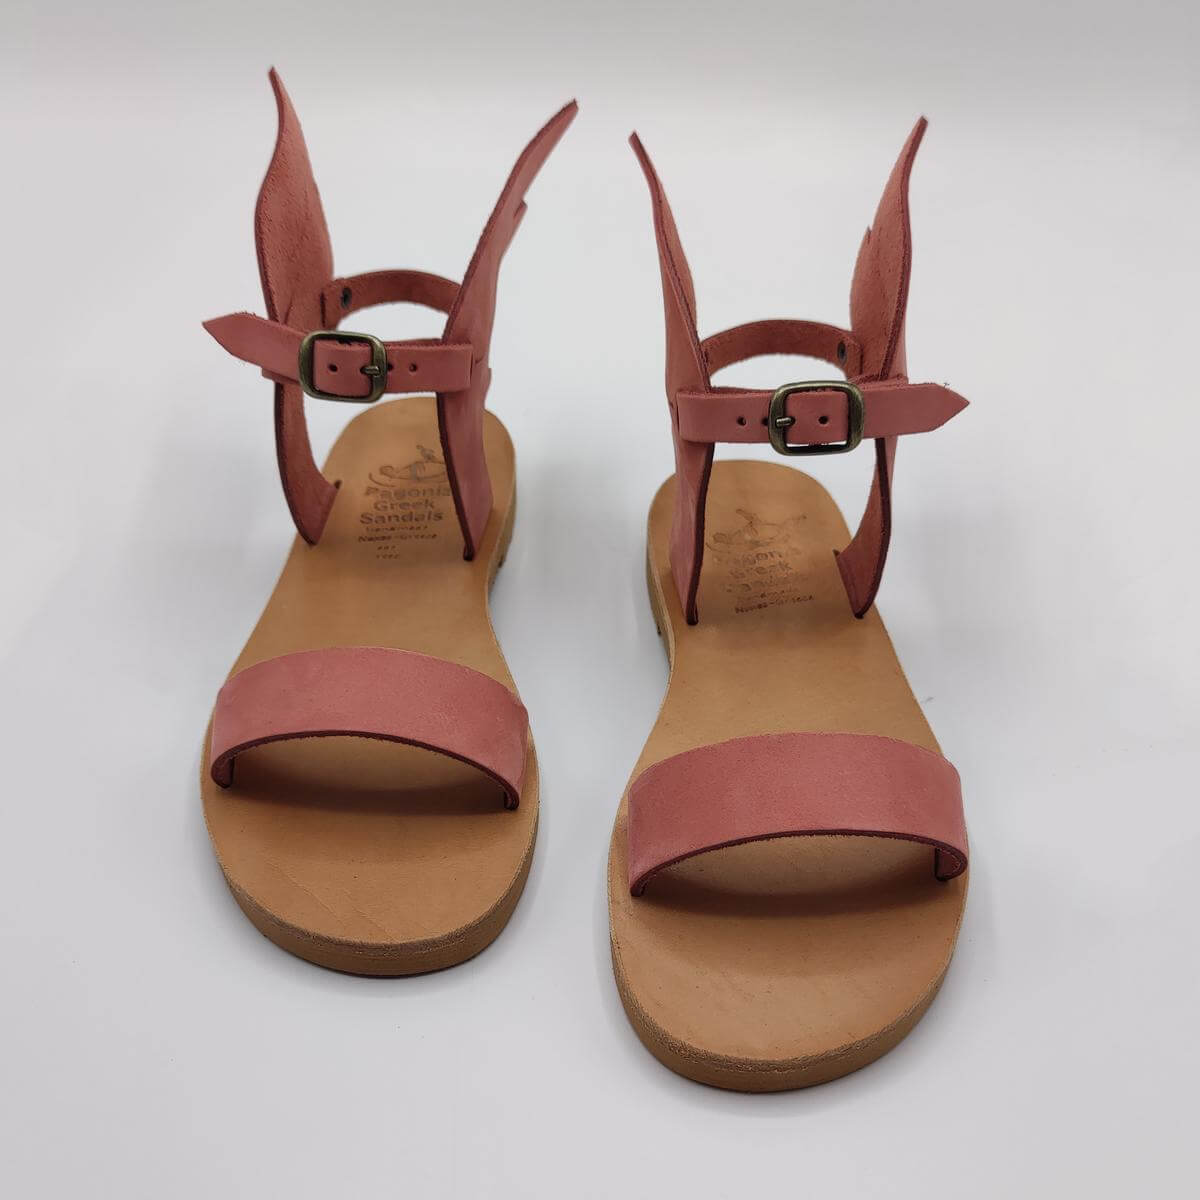 Kids Sandals With Wings Without Toe Strap Pink